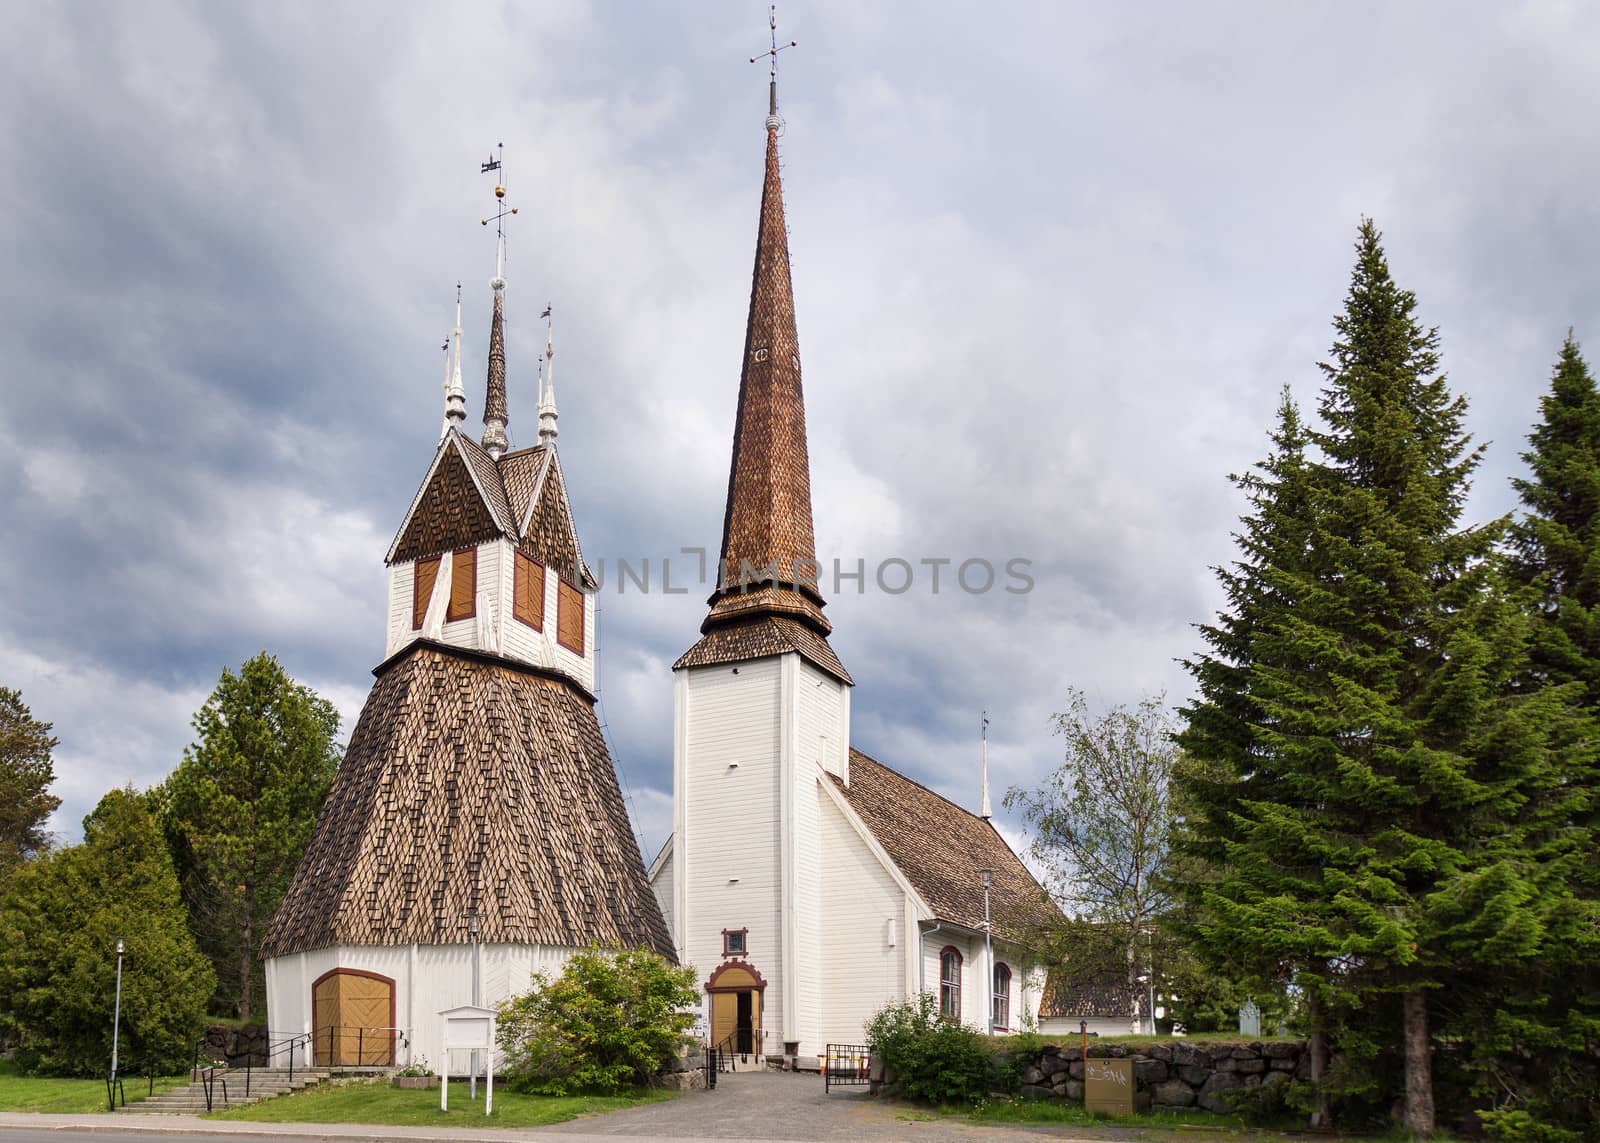 The wooden church was consecrated on July 11th 1686 and houses unique wall and ceiling paintings. It was built by Finnish peasant Matti Harma, and dedicated to Hedvig Elenora, Queen of Sweden. It is the oldest wooden church that is still used in northern Lapland.